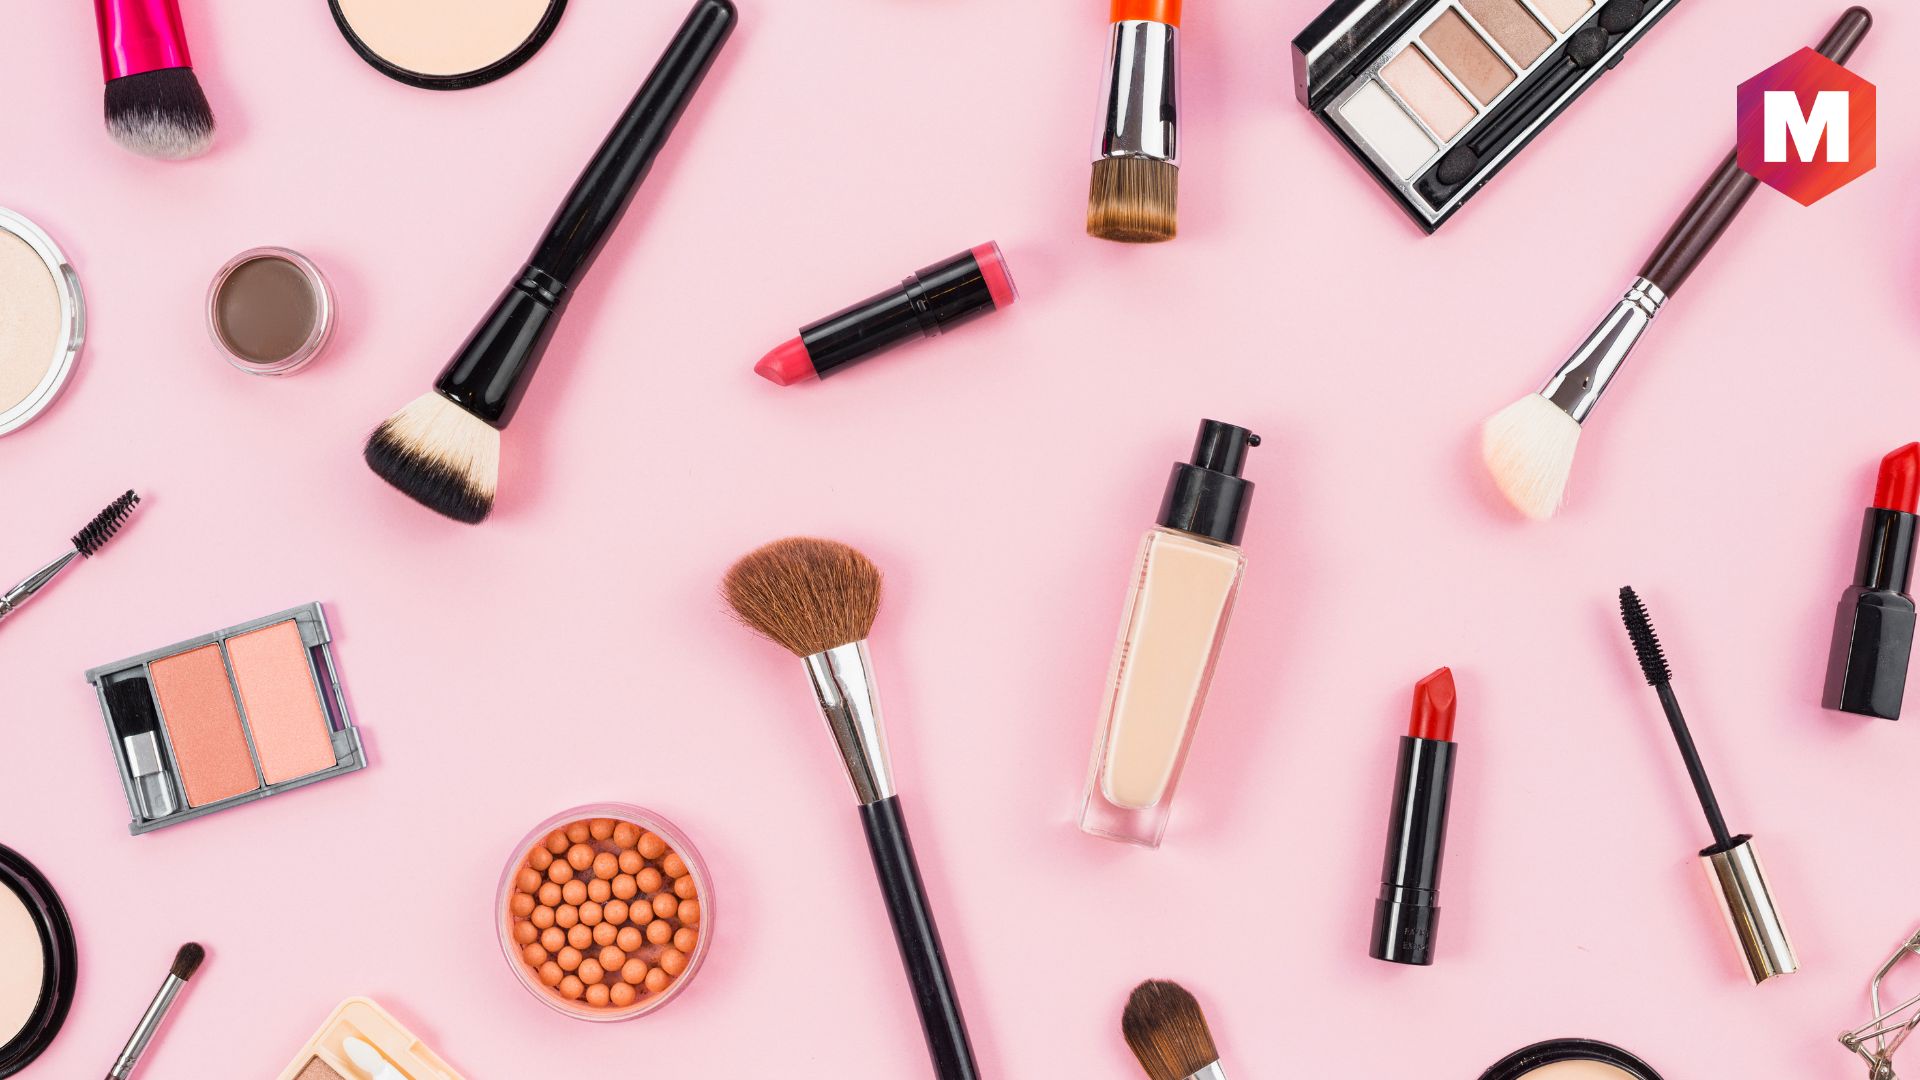 Chanel Cosmetics (500+ products) compare price now »